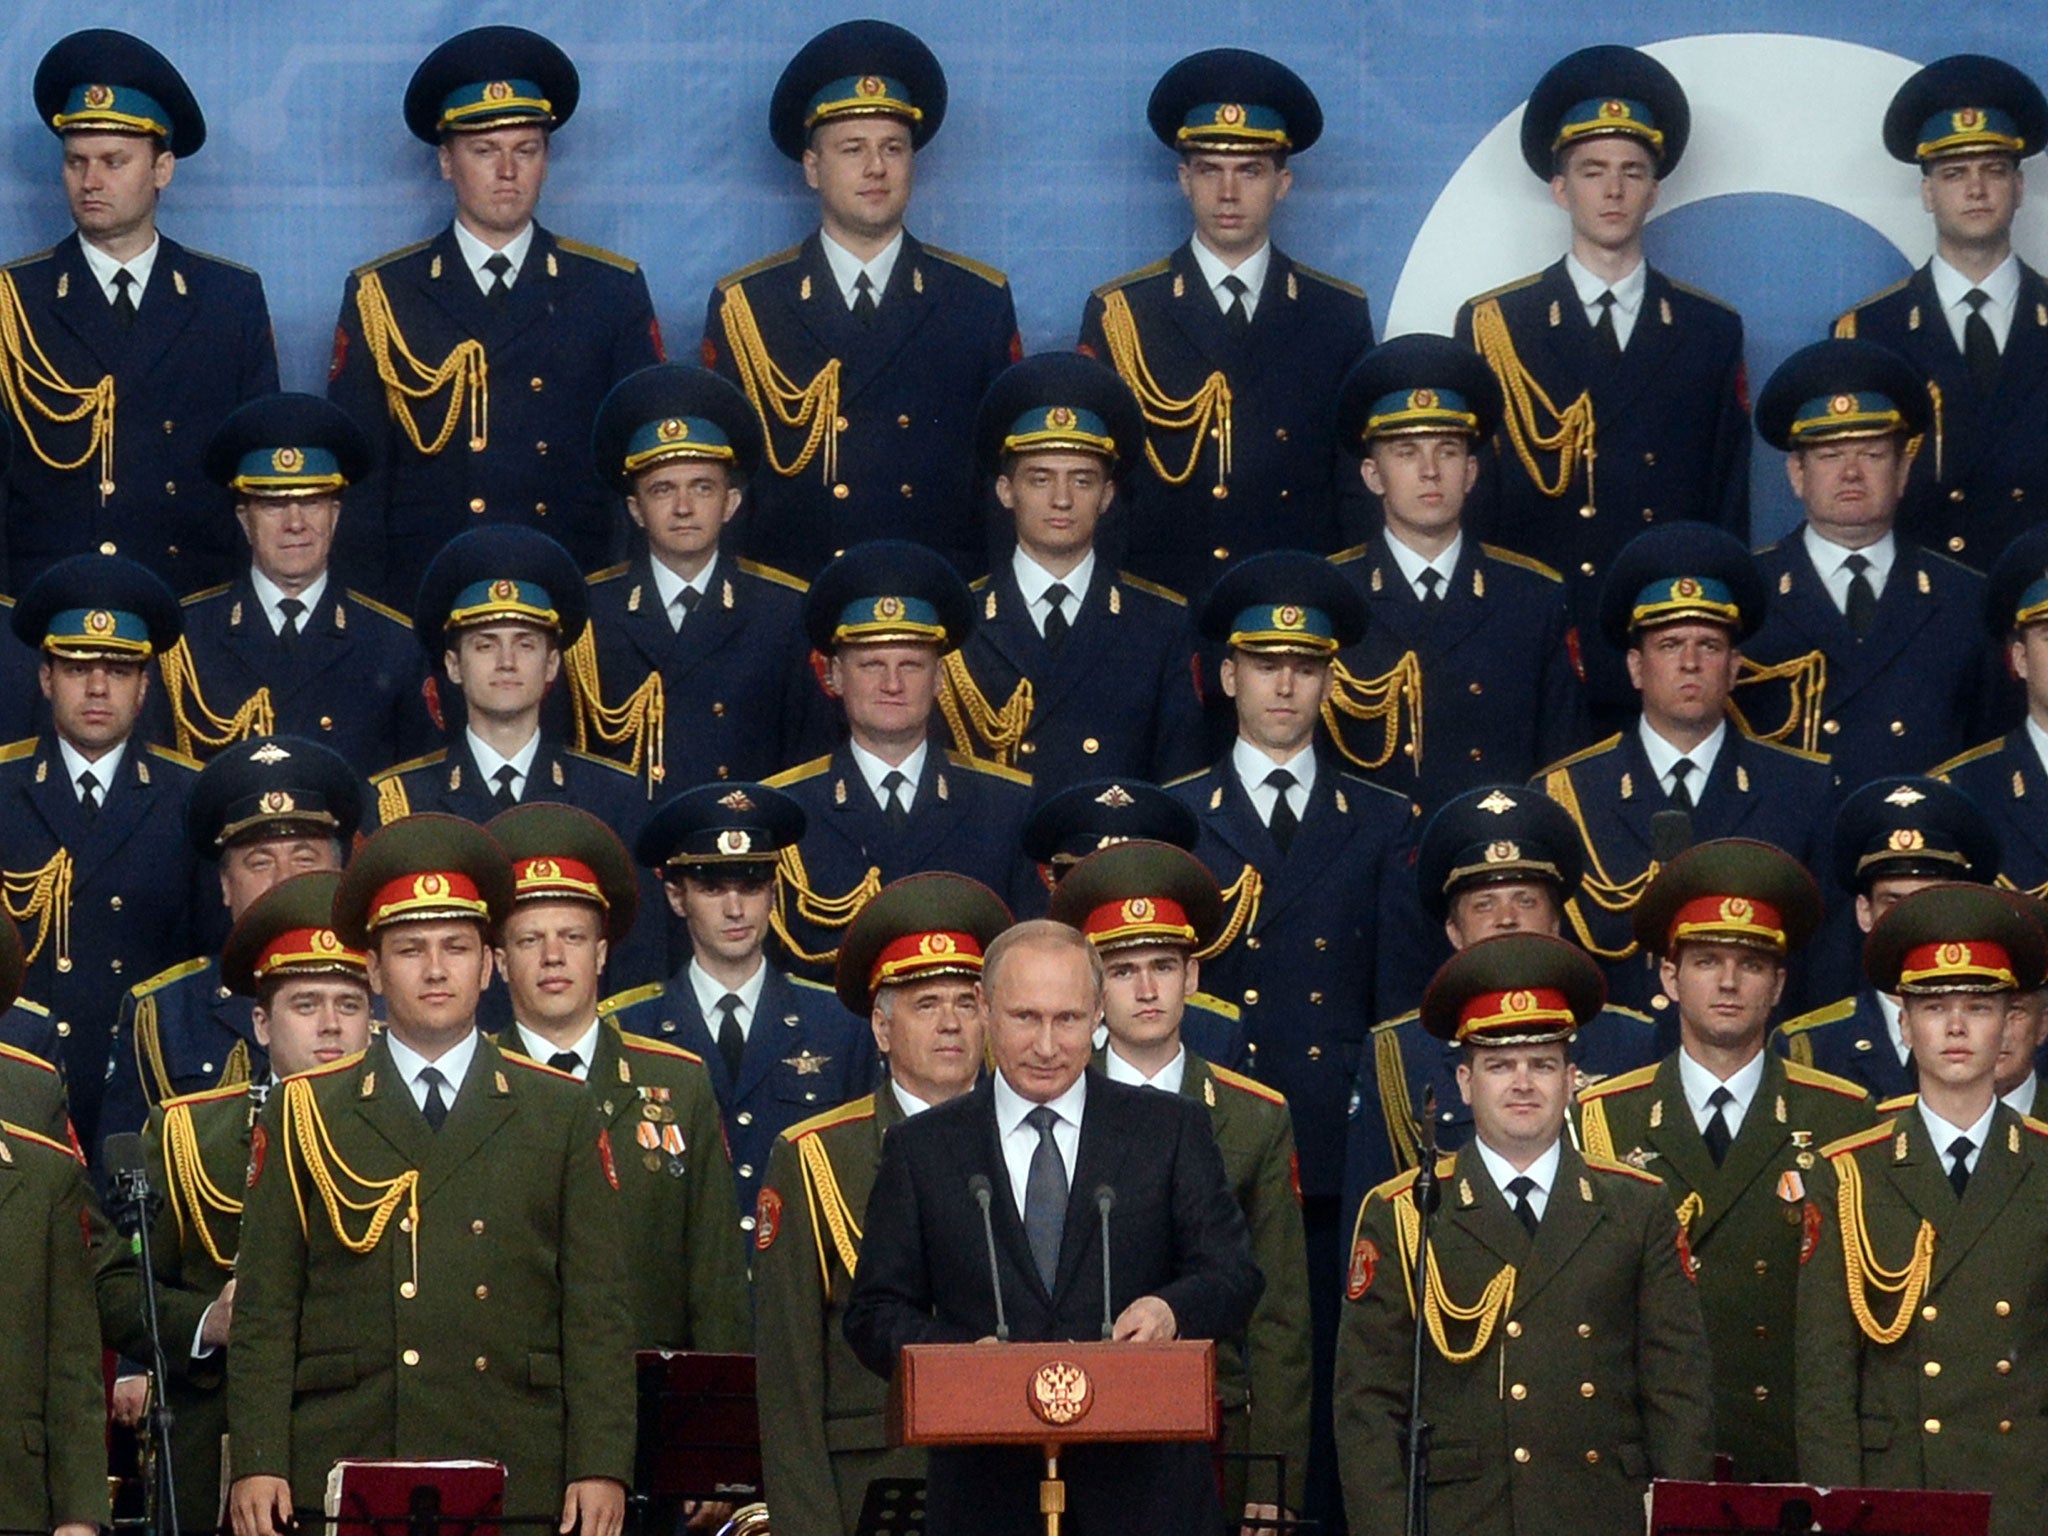 Russian President Vladimir Putin speaks at the opening of the Army-2015 international military forum